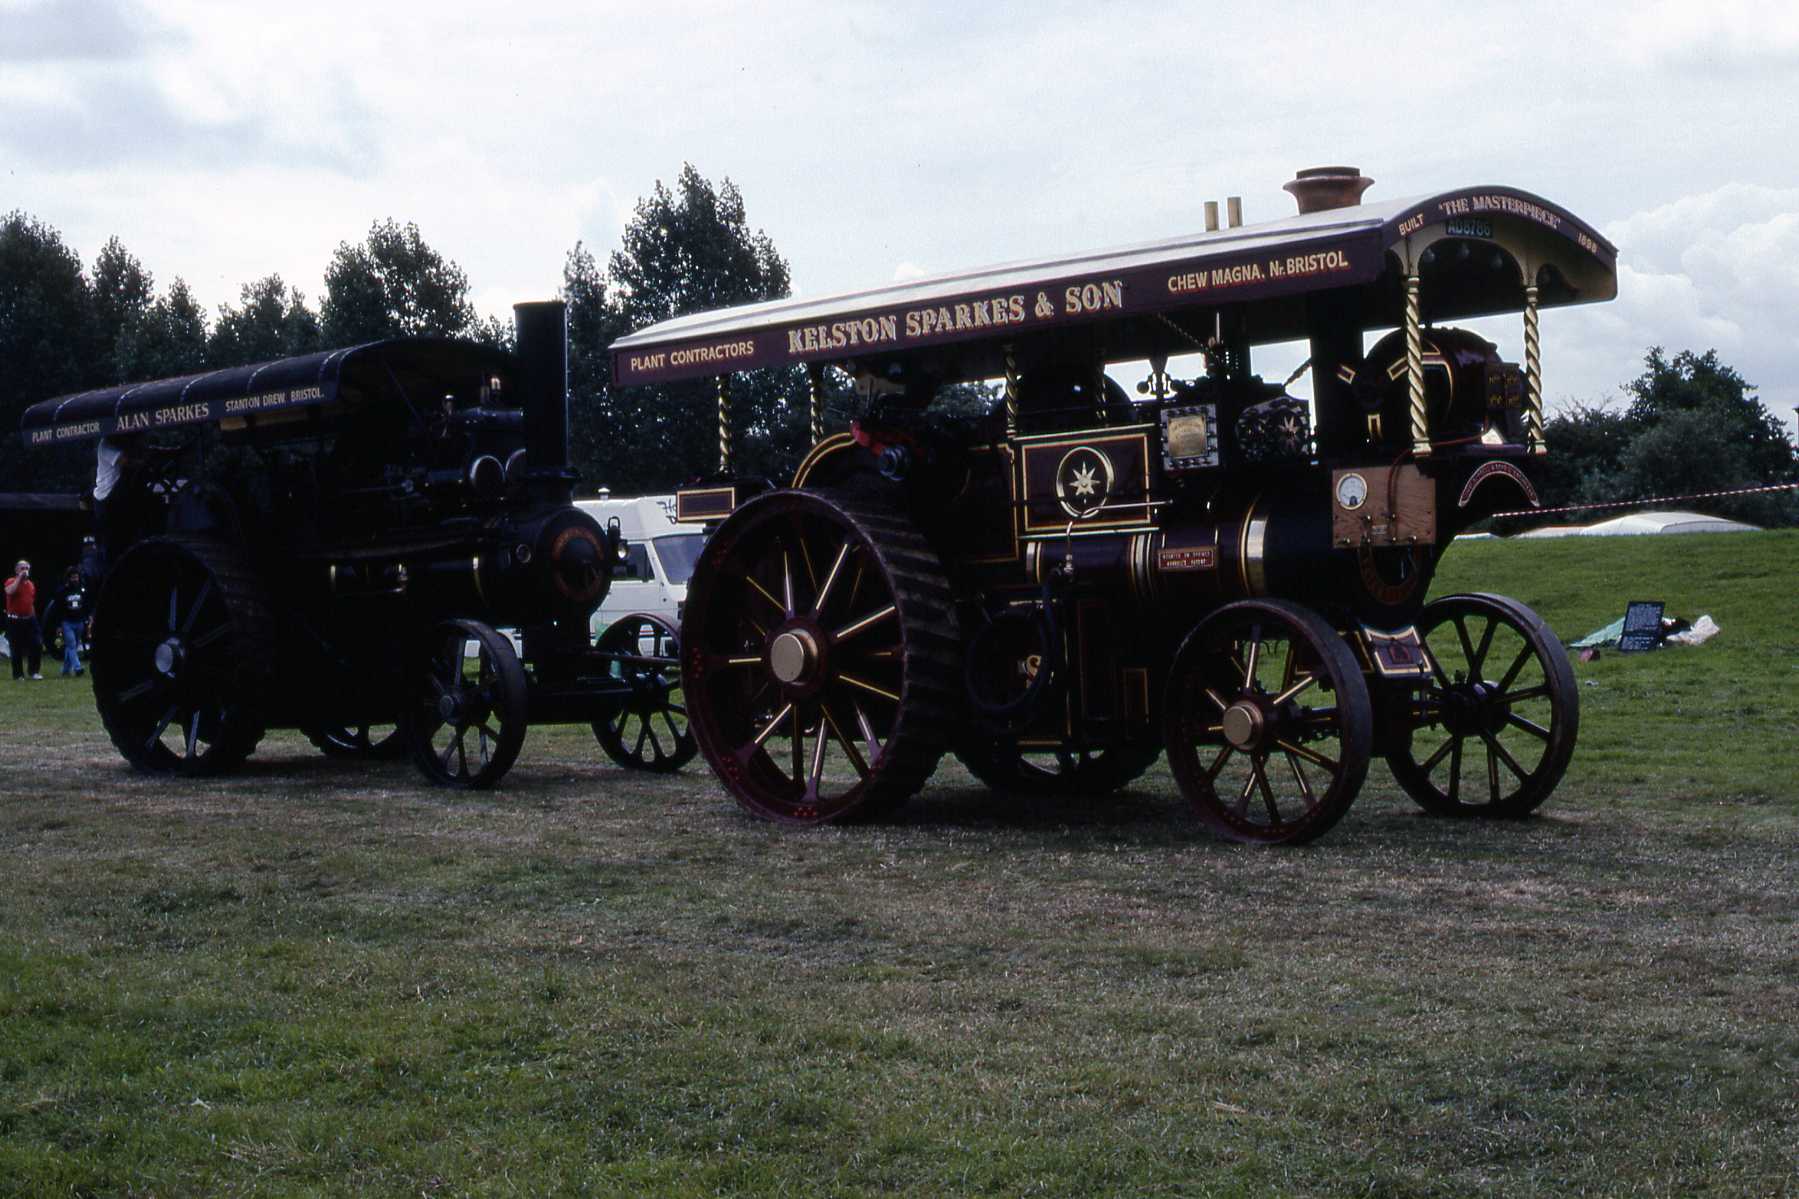 old steam engine and cab for event in grassy area